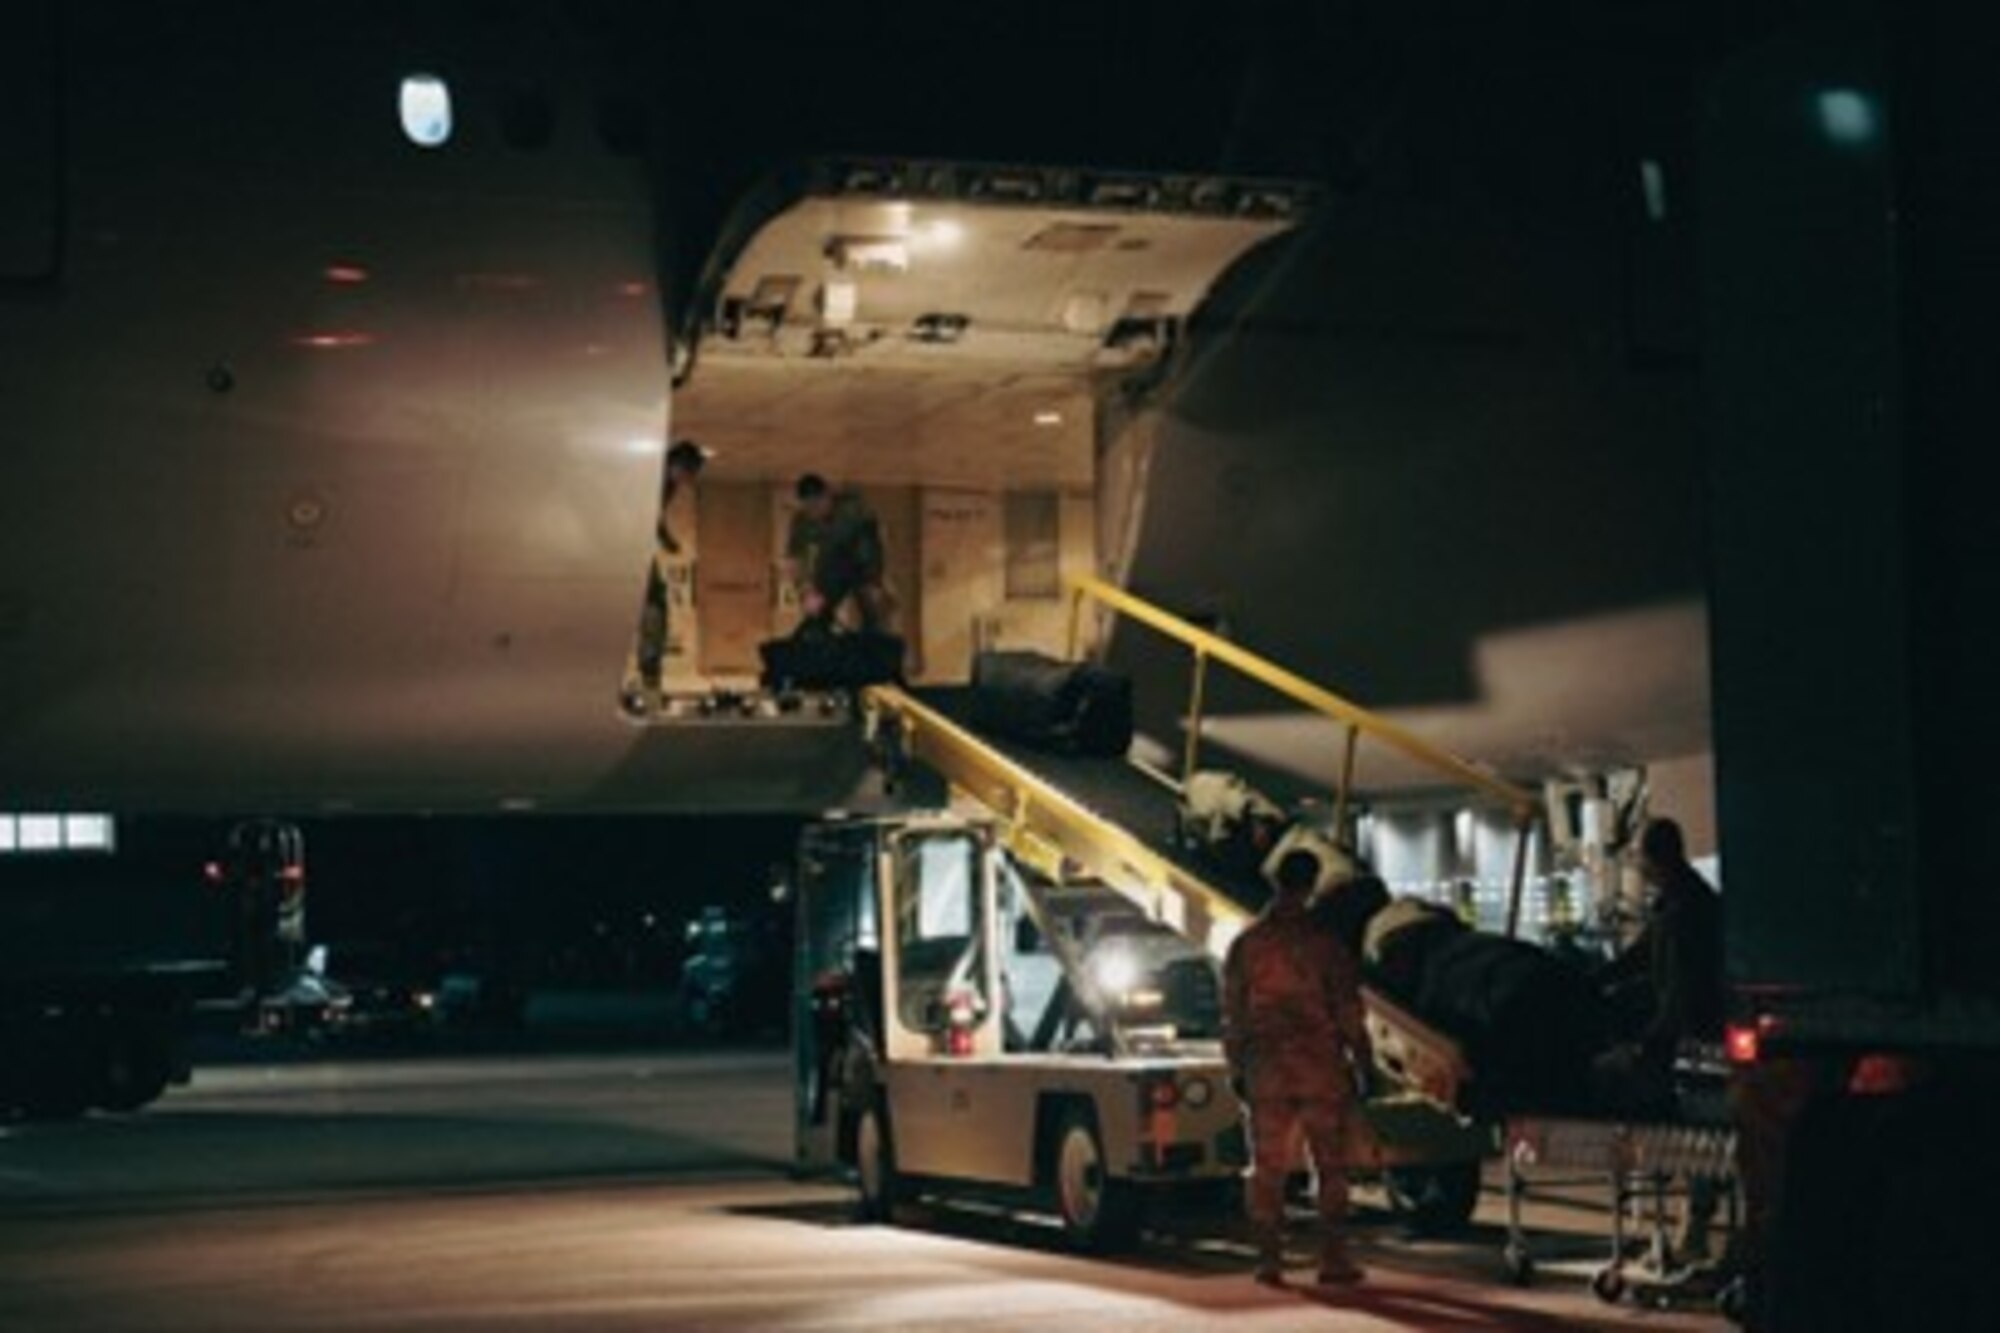 U.S. Airmen assigned to the 28th Logistics Readiness Squadron load equipment to a Boeing 777 for a Bomber Task Force operation at Ellsworth Air Force Base, South Dakota, on Oct 14, 2022. The U.S. Indo-Pacific Command routinely and visibly demonstrates commitment to our allies and partners through the global employment of our military forces. (U.S. Air Force photo by Senior Airman Austin McIntosh)